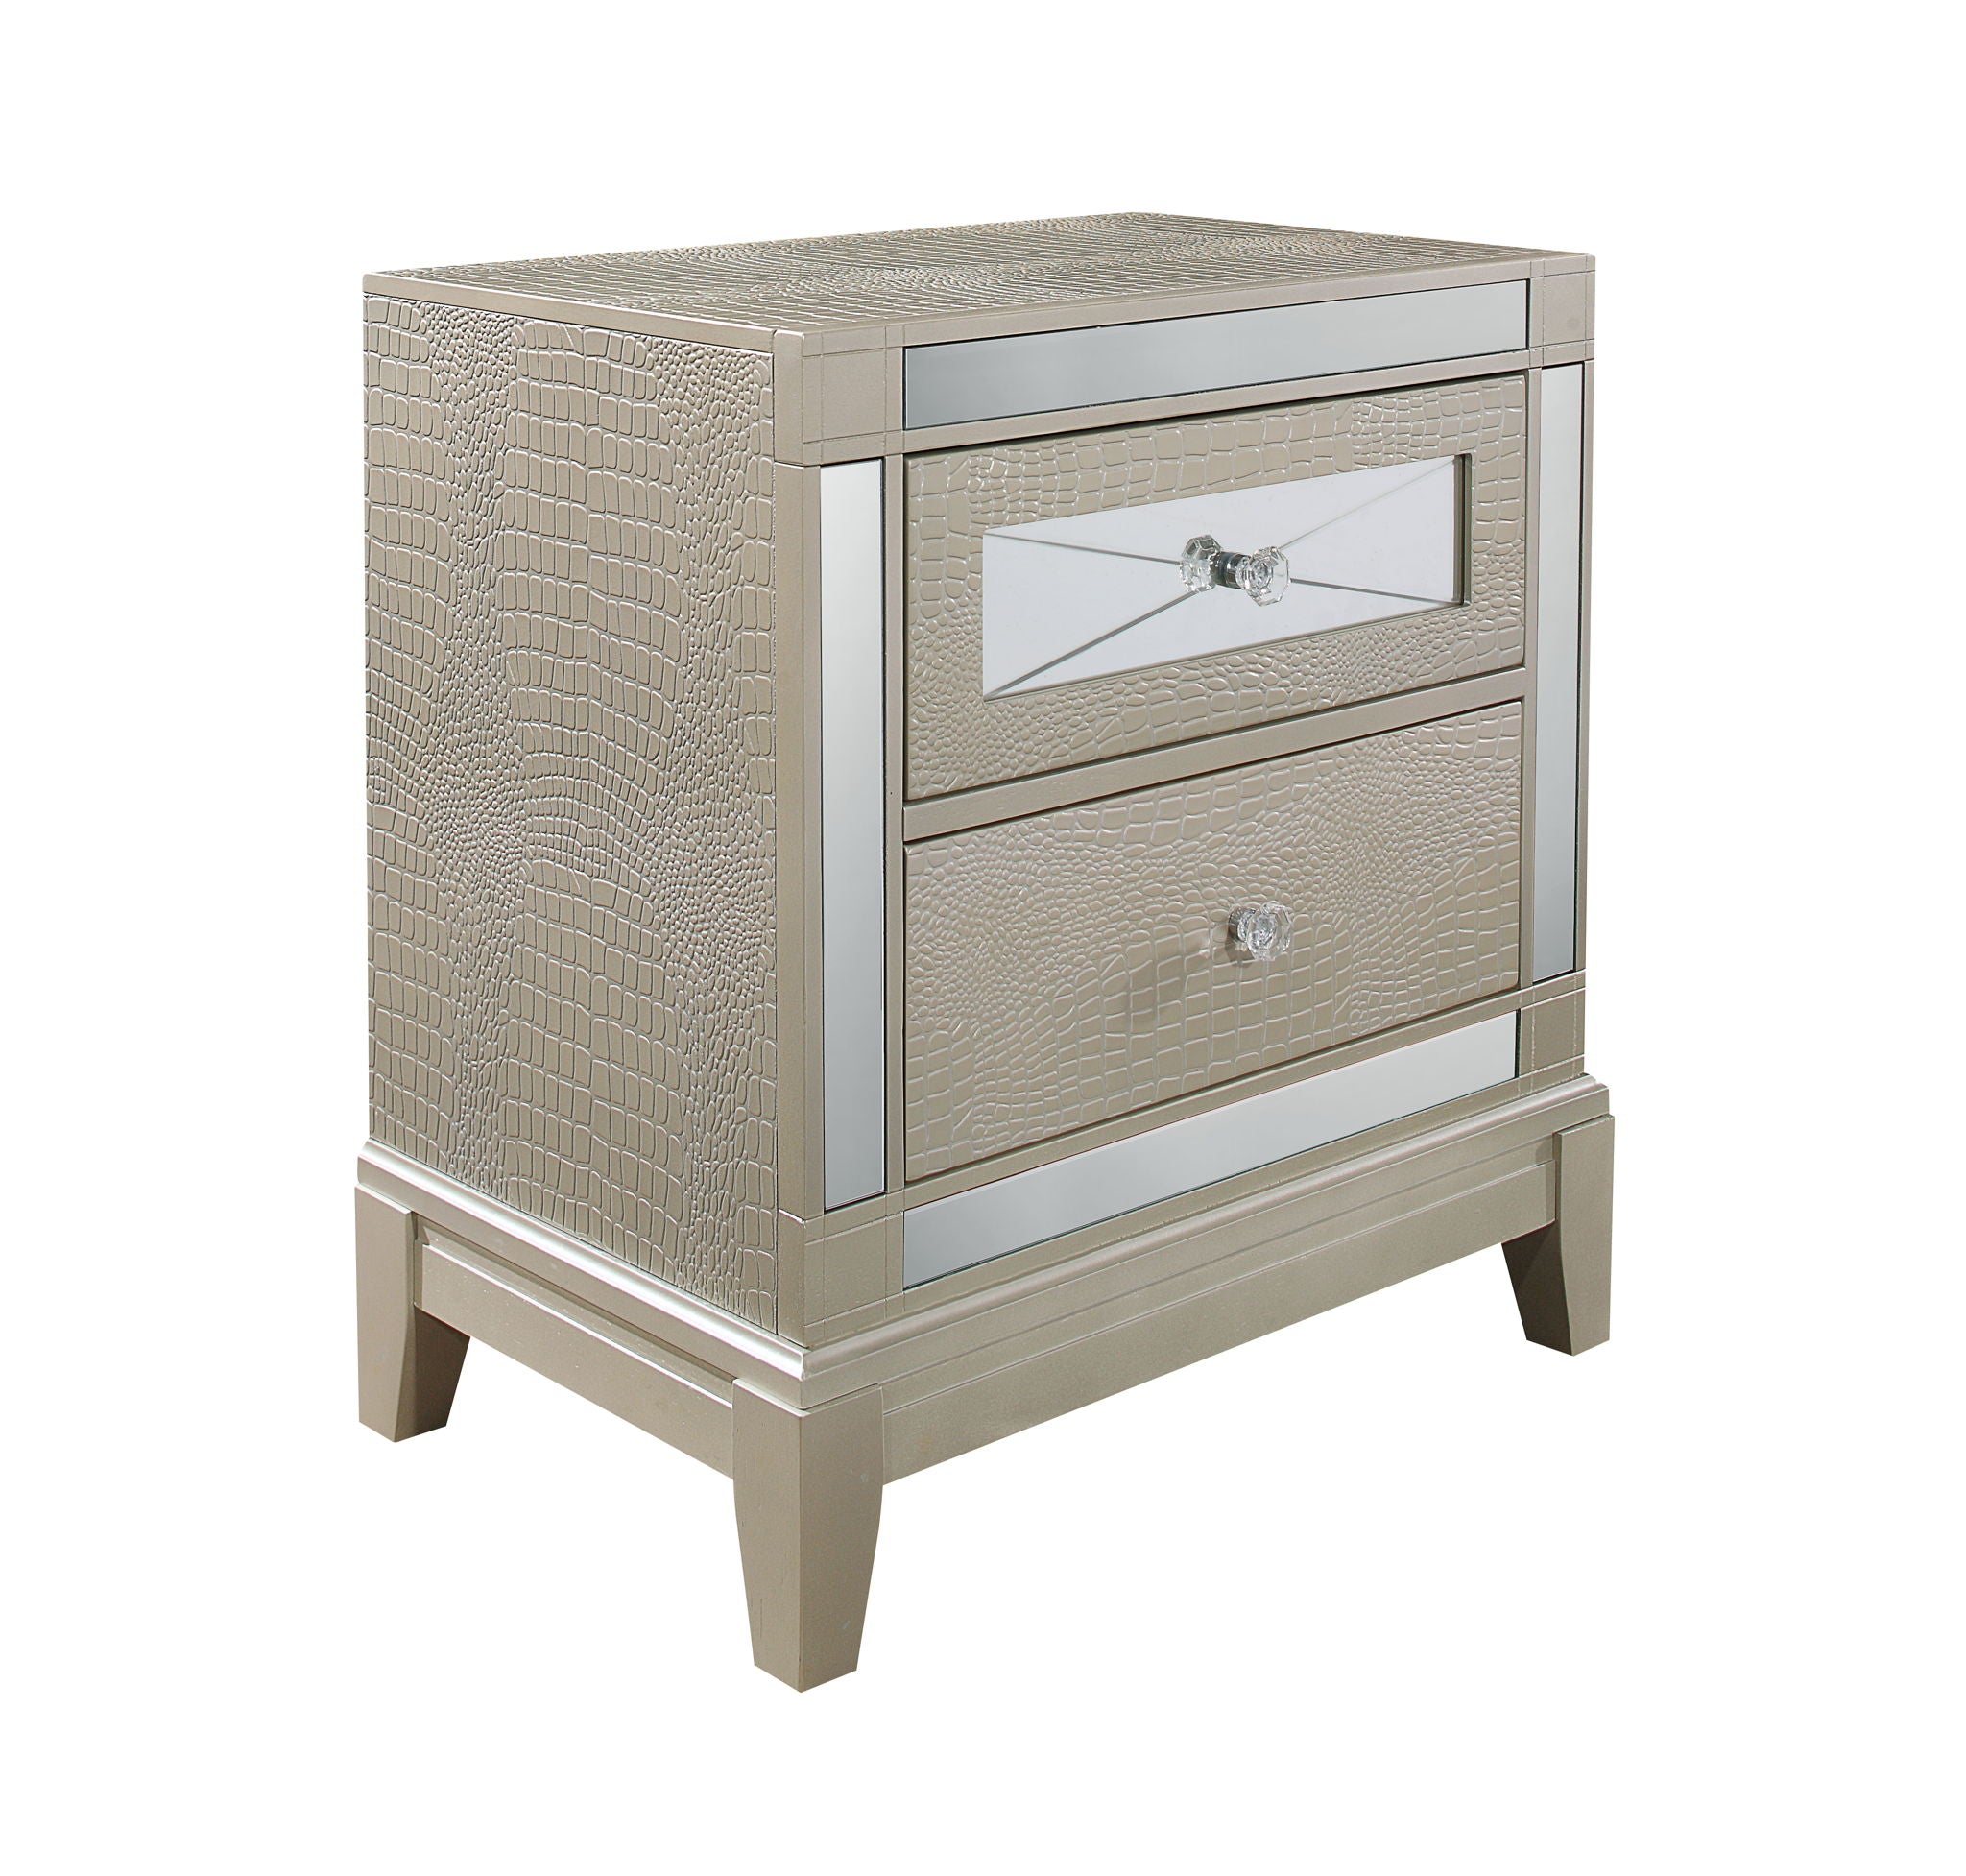 Nicolette - Champagne - Two Drawer Night Stand